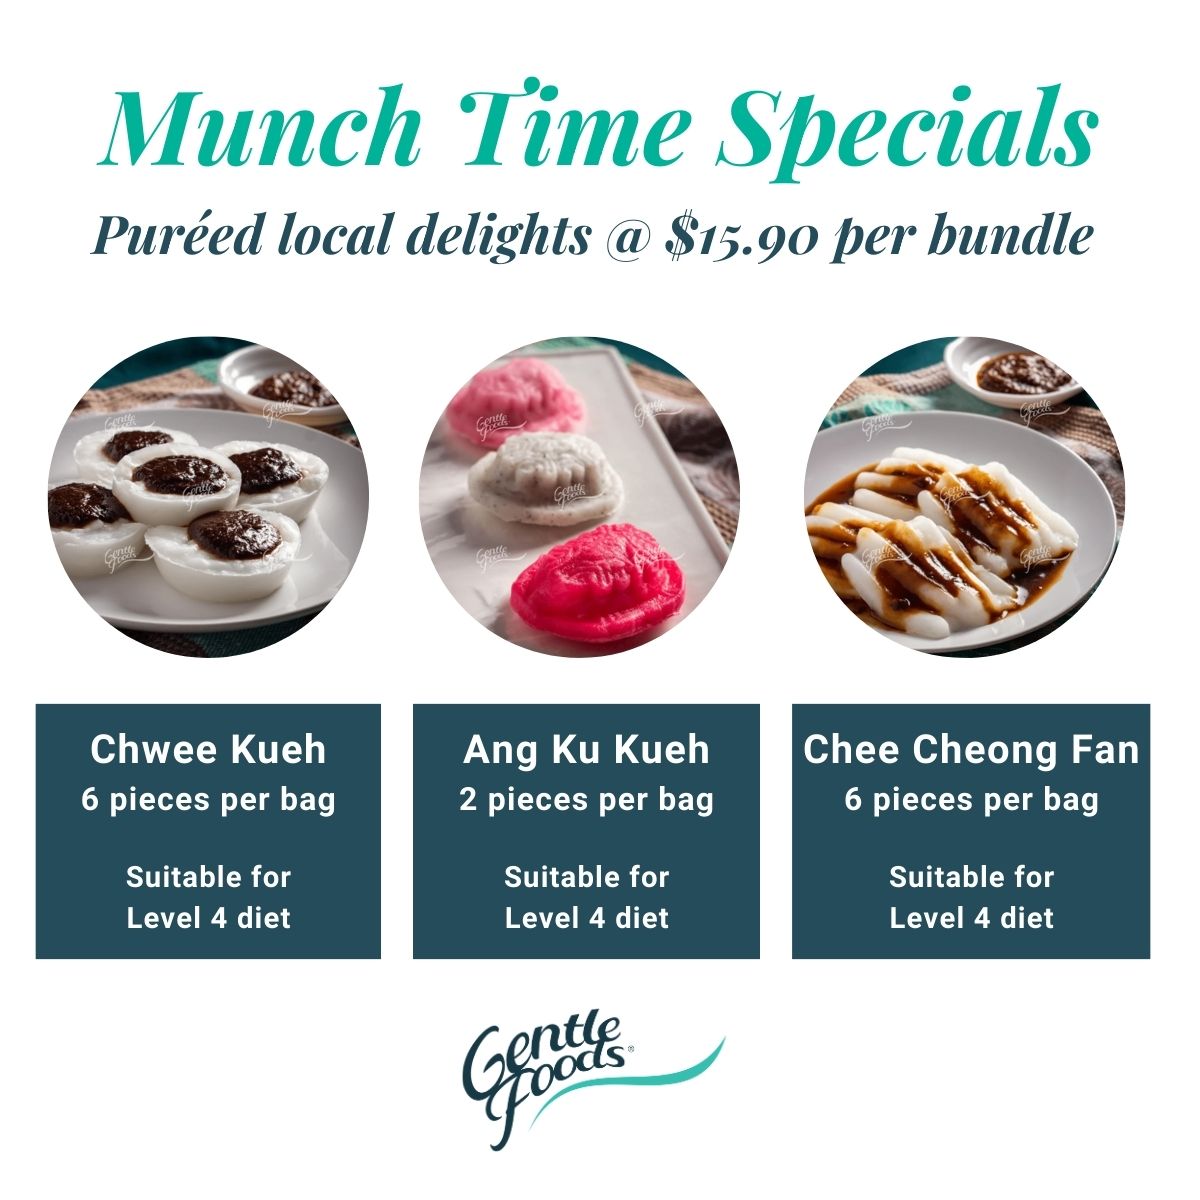 Munch Time Special